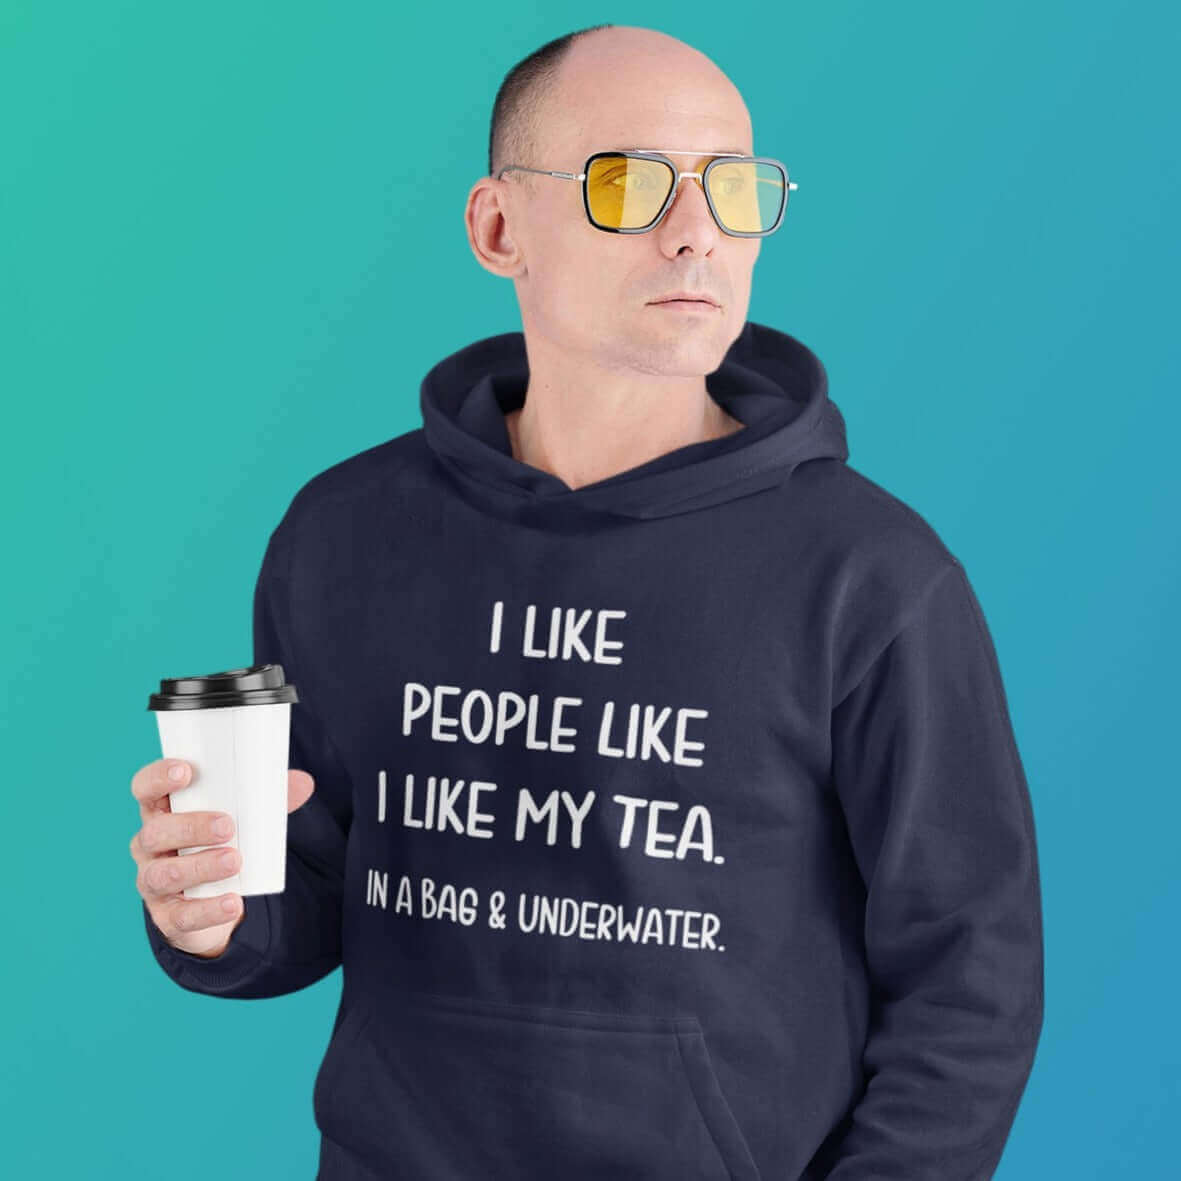 Serious looking man holding cup of tea. He is wearing a navy blue hoodie sweatshirt with the phrase I like people like I like my tea, In a bag & underwater printed on the front.